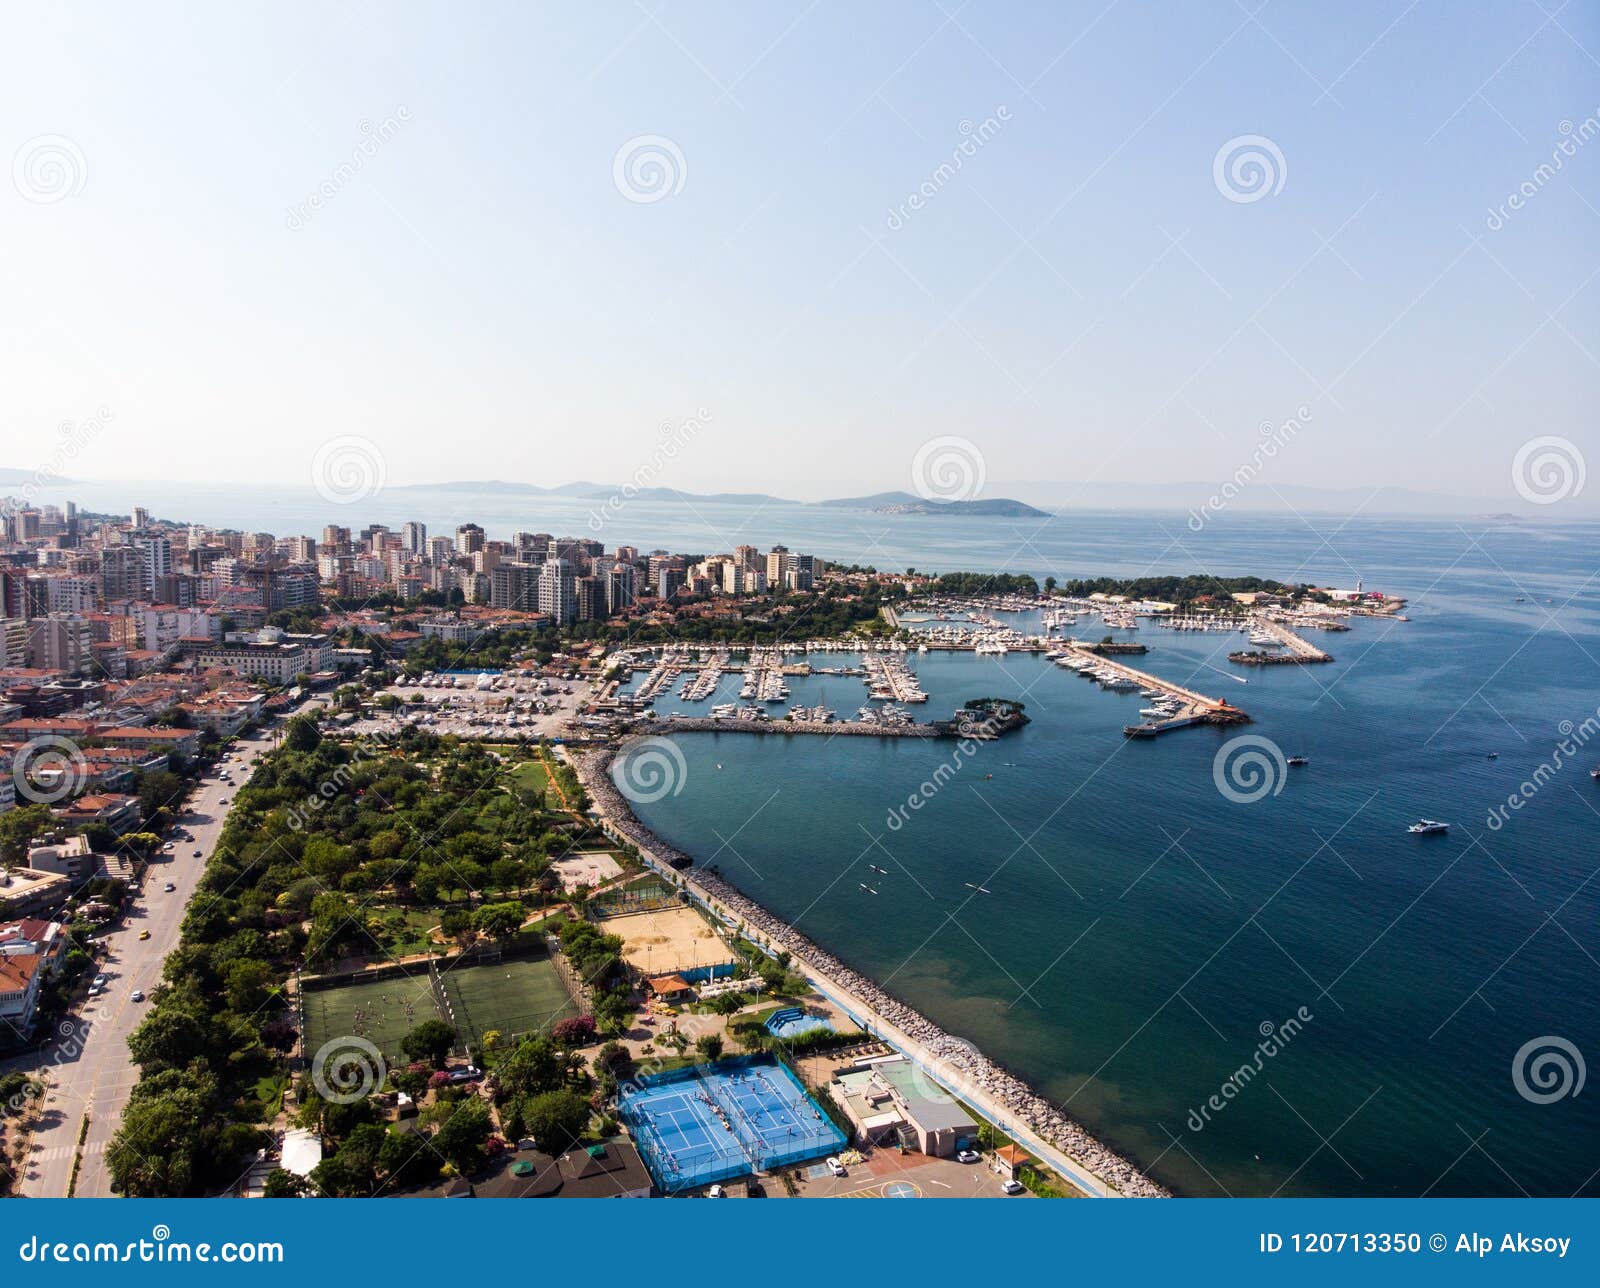 aerial drone view of kalamis fenerbahce marina in istanbul